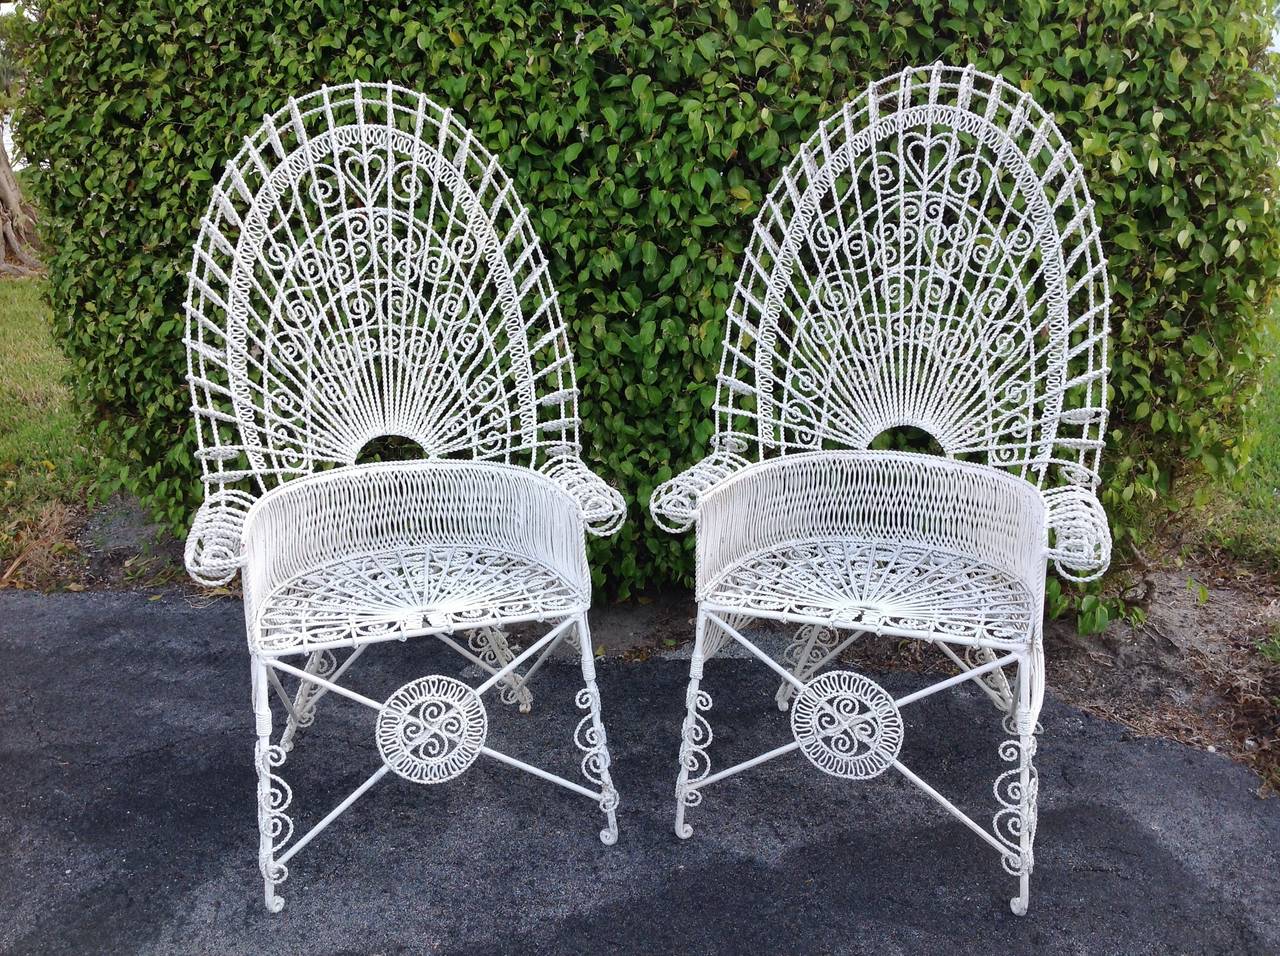 A pair of unusual fanciful iron wirework chairs with arched tops and barrel
Shaped backs. Ornate filigree designs end in rolled arms with lacy patterned
Seats. There are 